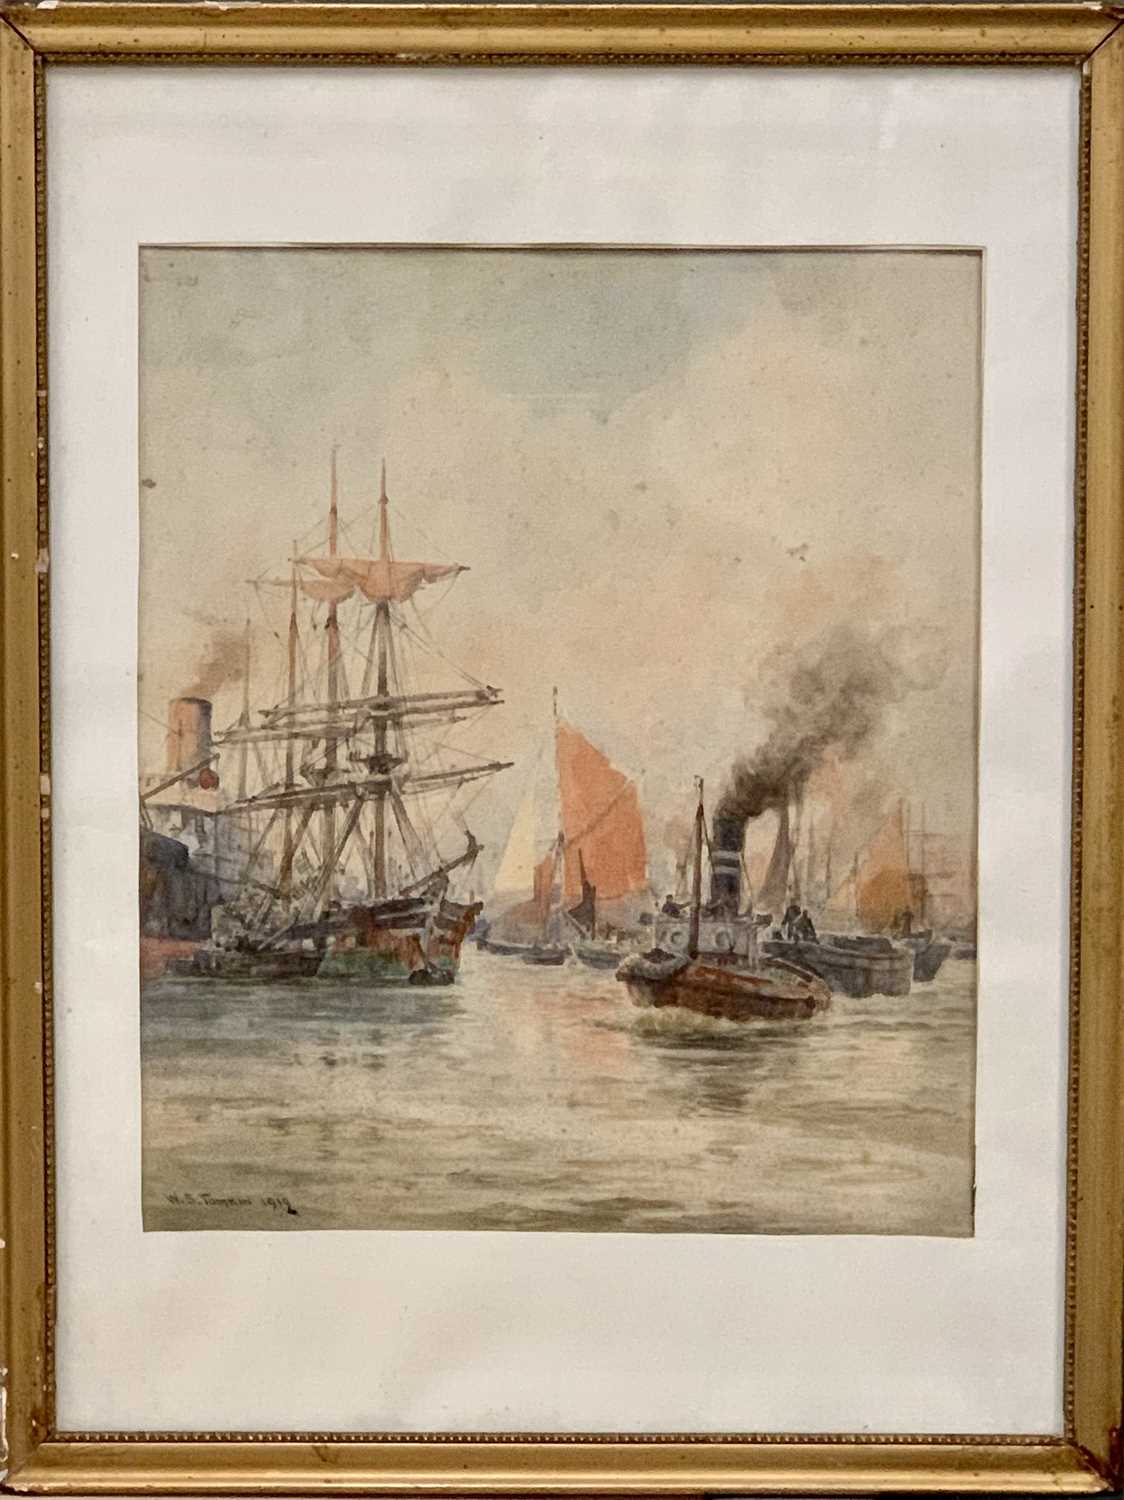 W S TOMKIN watercolour - busy harbour scene showing masted ships, steamers, tug boat and barges, - Image 2 of 3